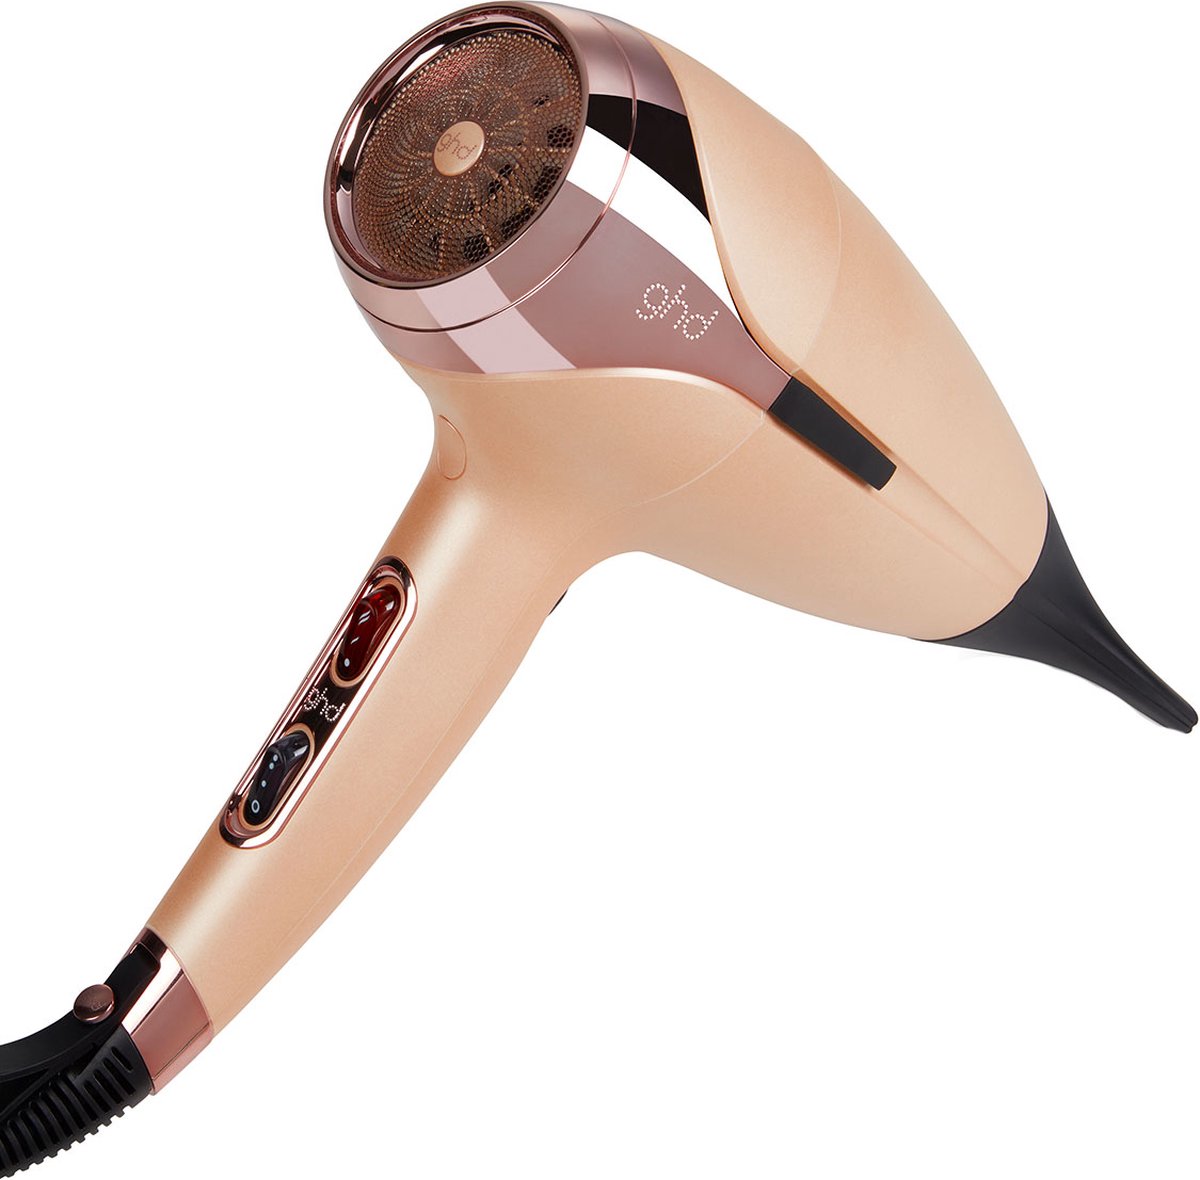 ghd professional hair dryer helios™ - föhn - haardorger - sunsthetic collection -limited edition